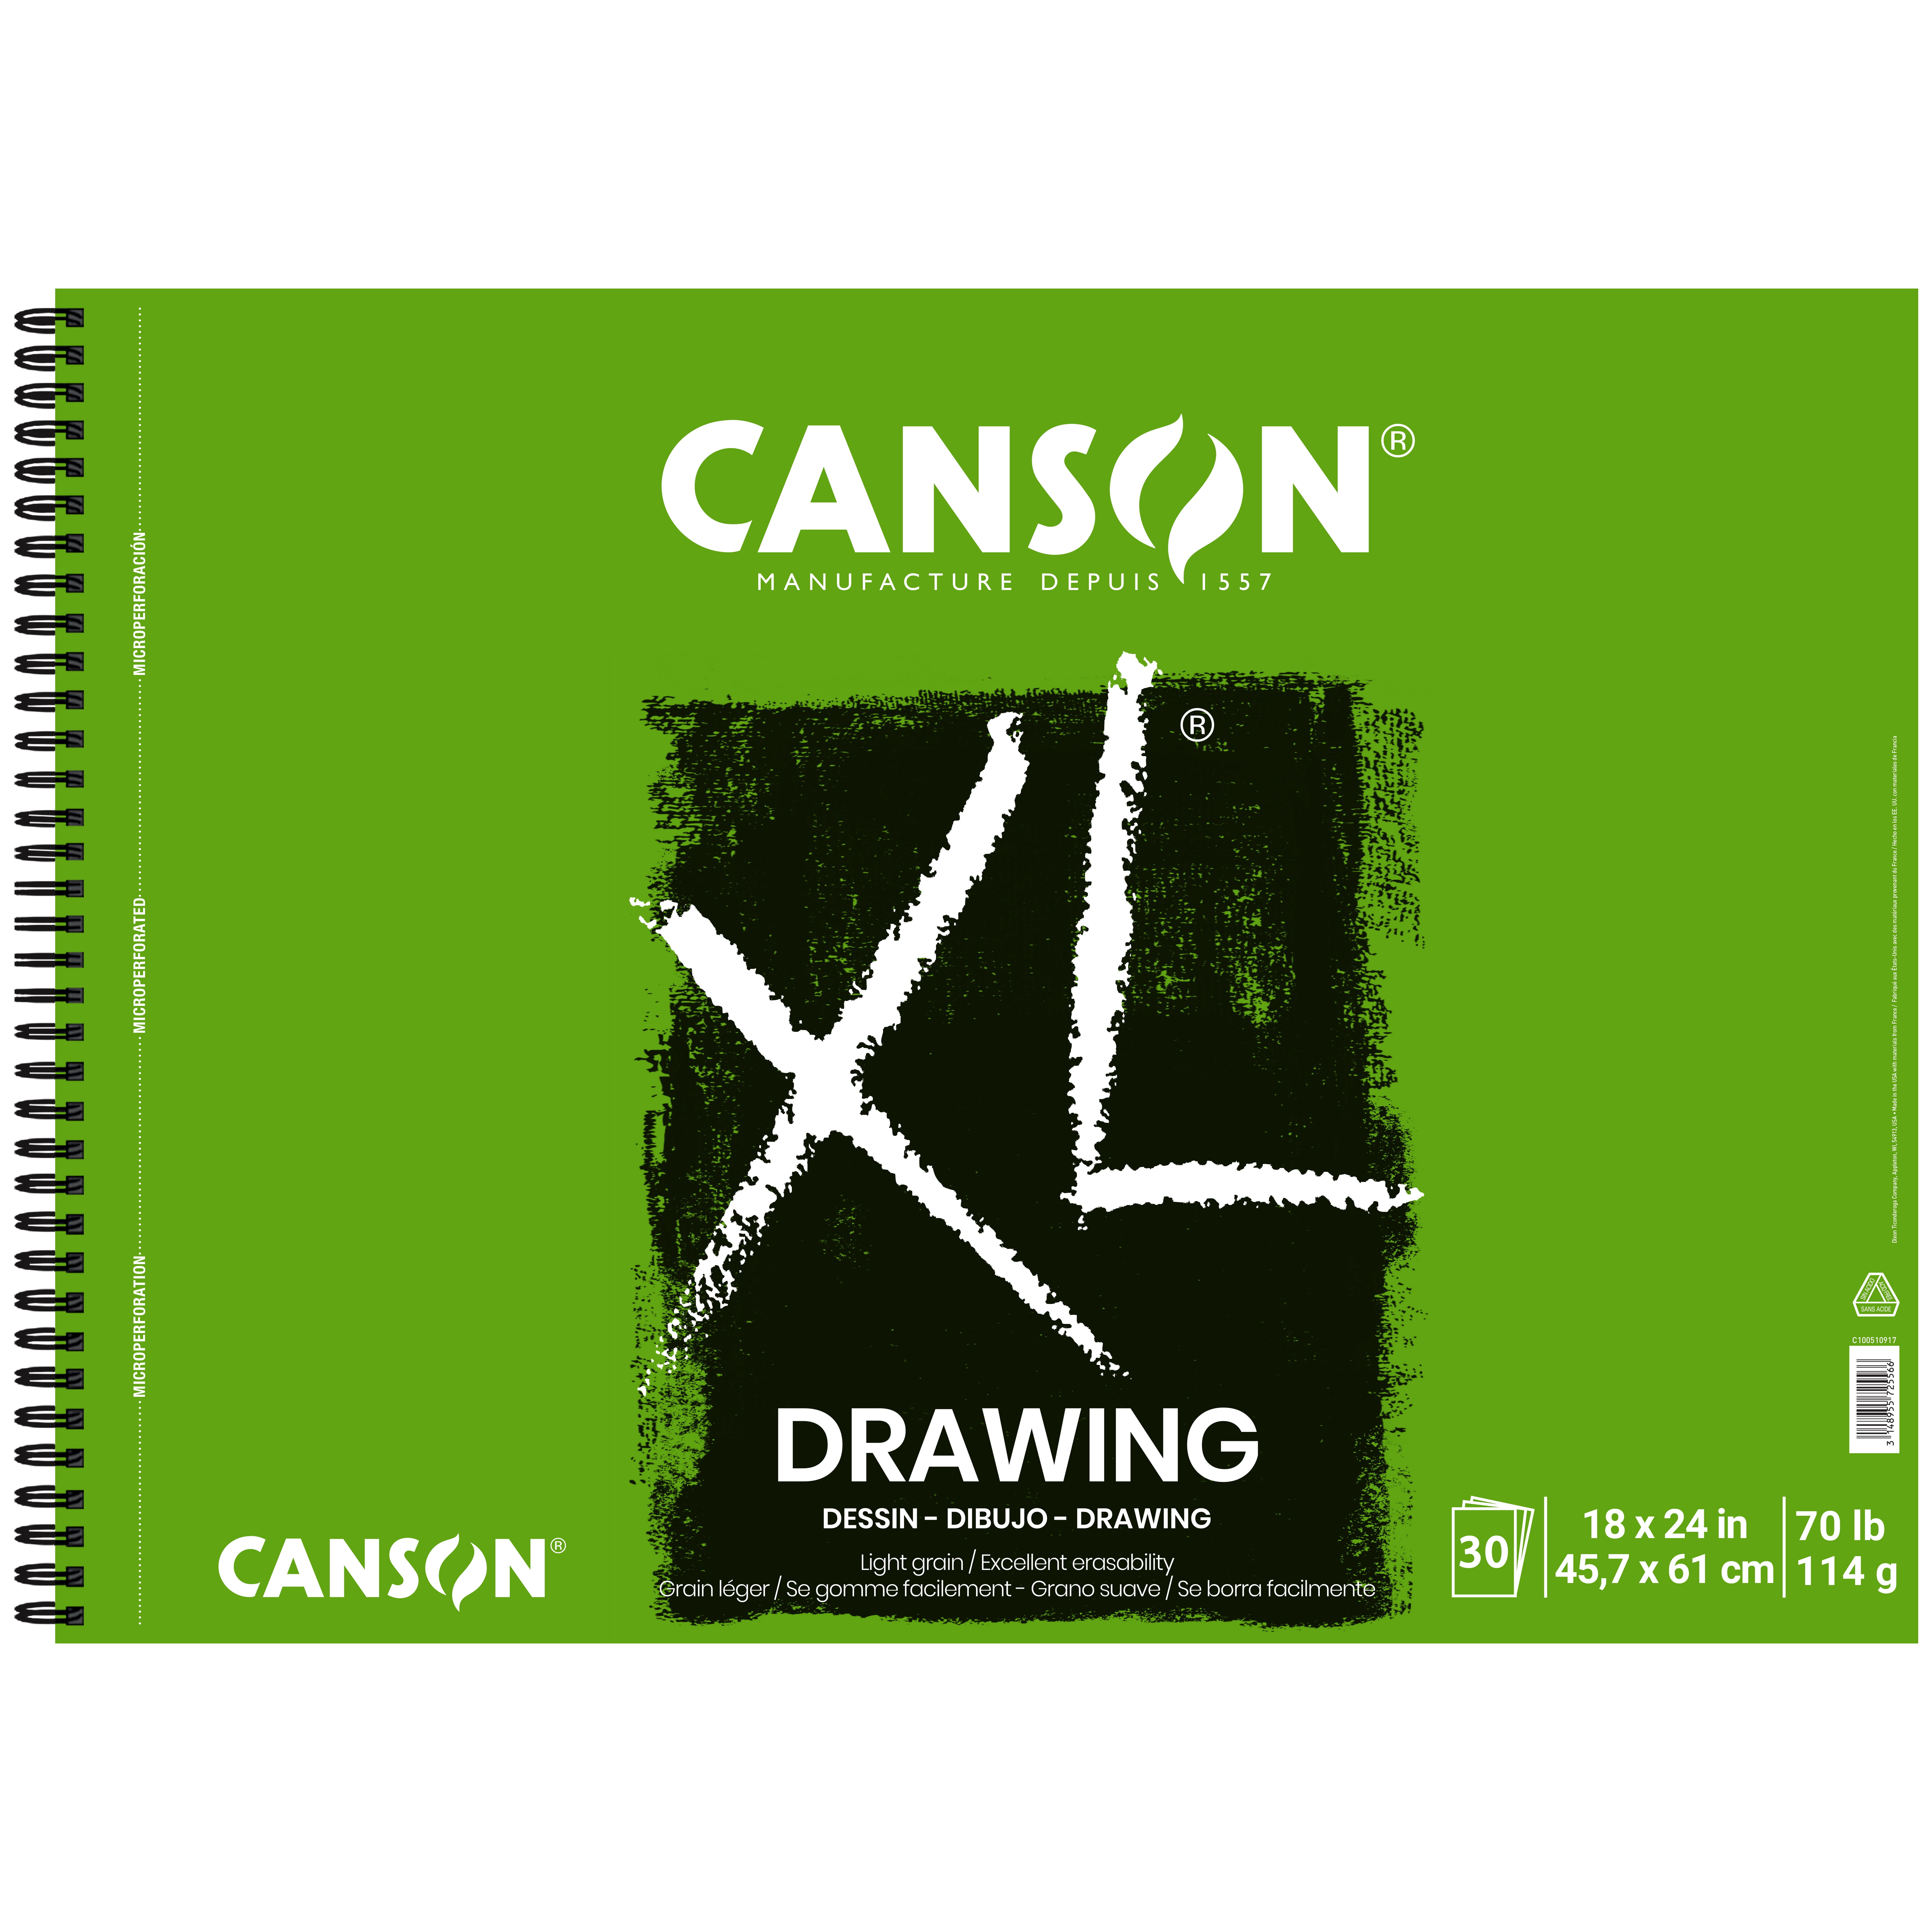 Canson Pure White Drawing Pad, 18 x 24, 24 Sheets